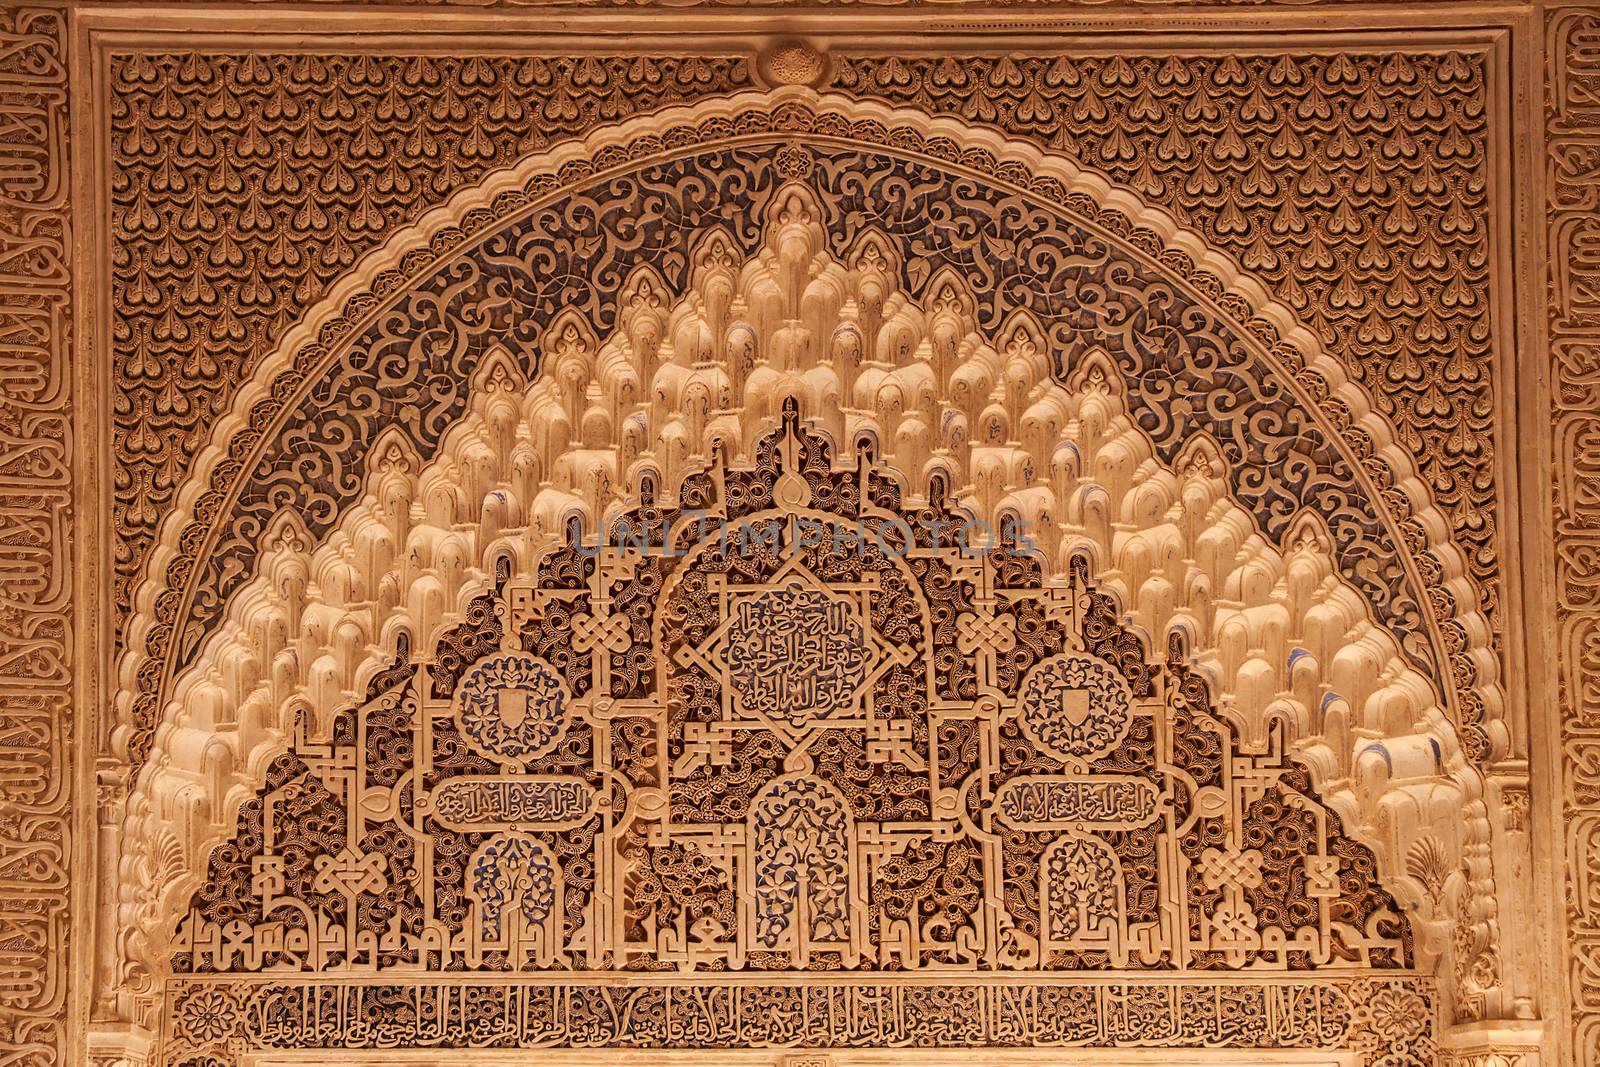 Ancient arabian ornament on a wall in Alhambra palace, Granada, Andalucia, Spain